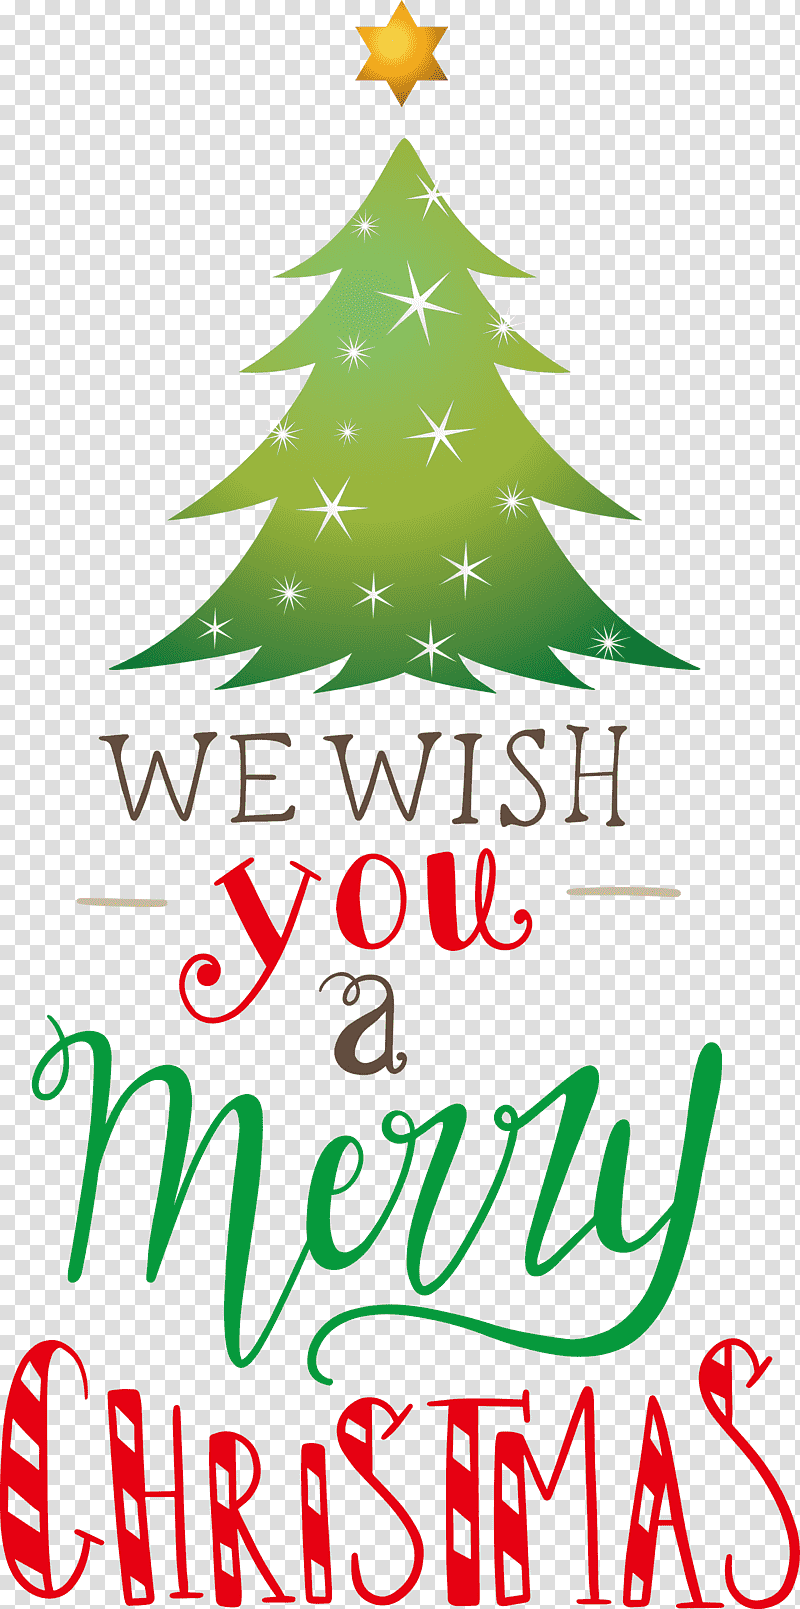 Merry Christmas We Wish You A Merry Christmas, Christmas Tree, Christmas Day, Holiday Ornament, Fir, Christmas Ornament, Spruce transparent background PNG clipart